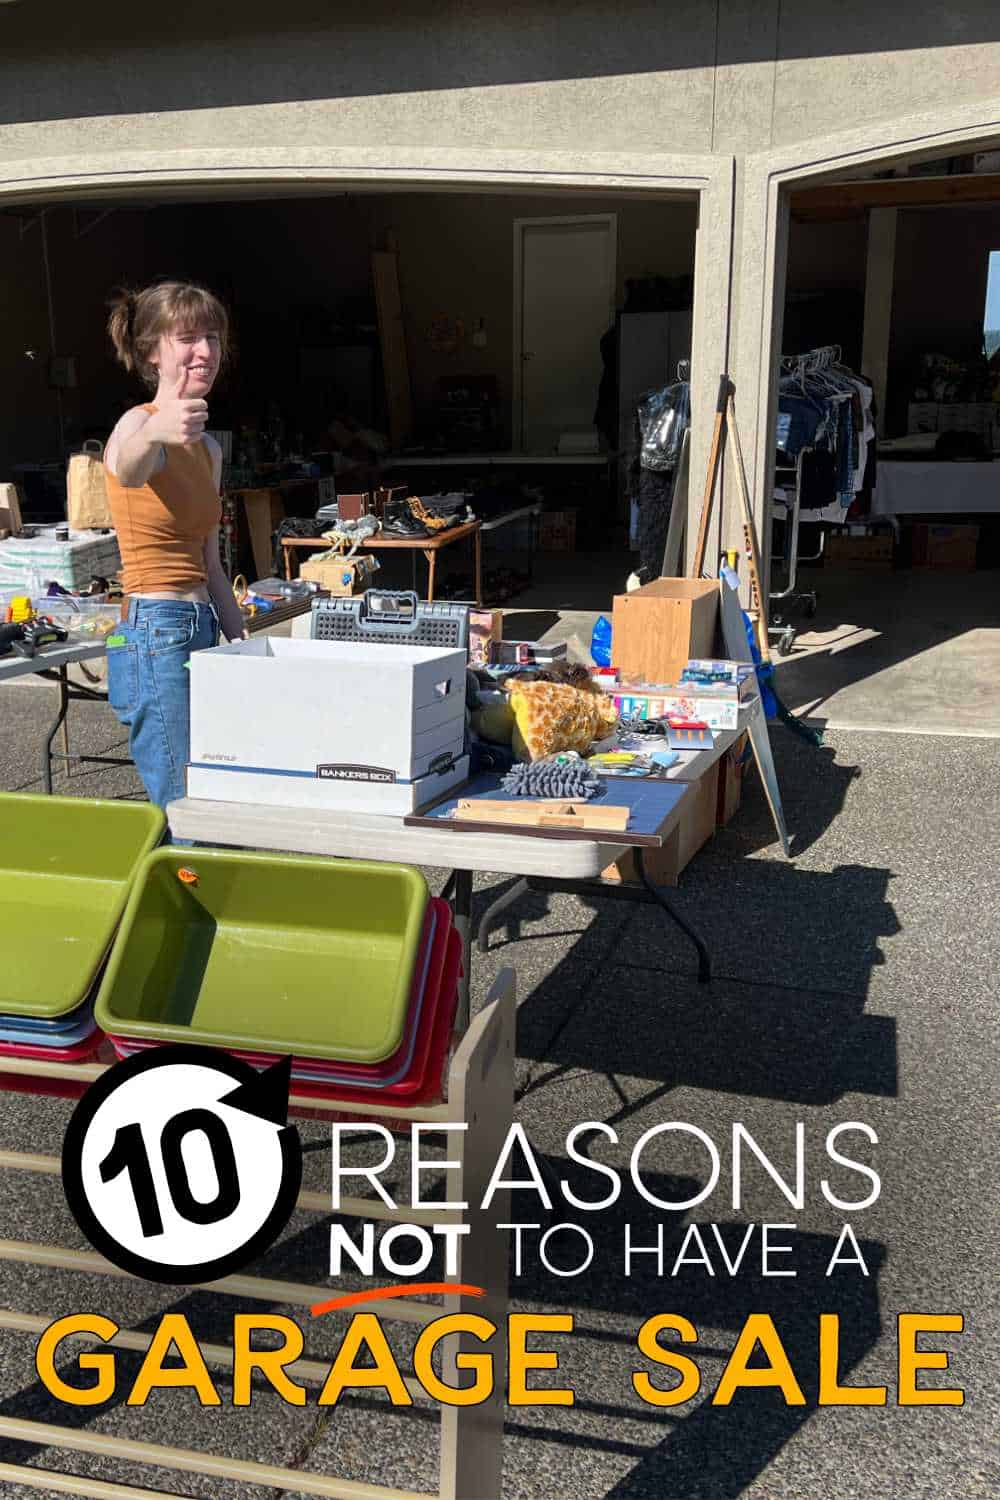 Garage sale girl thumbs up text: 10 reasons not to have a garage sale